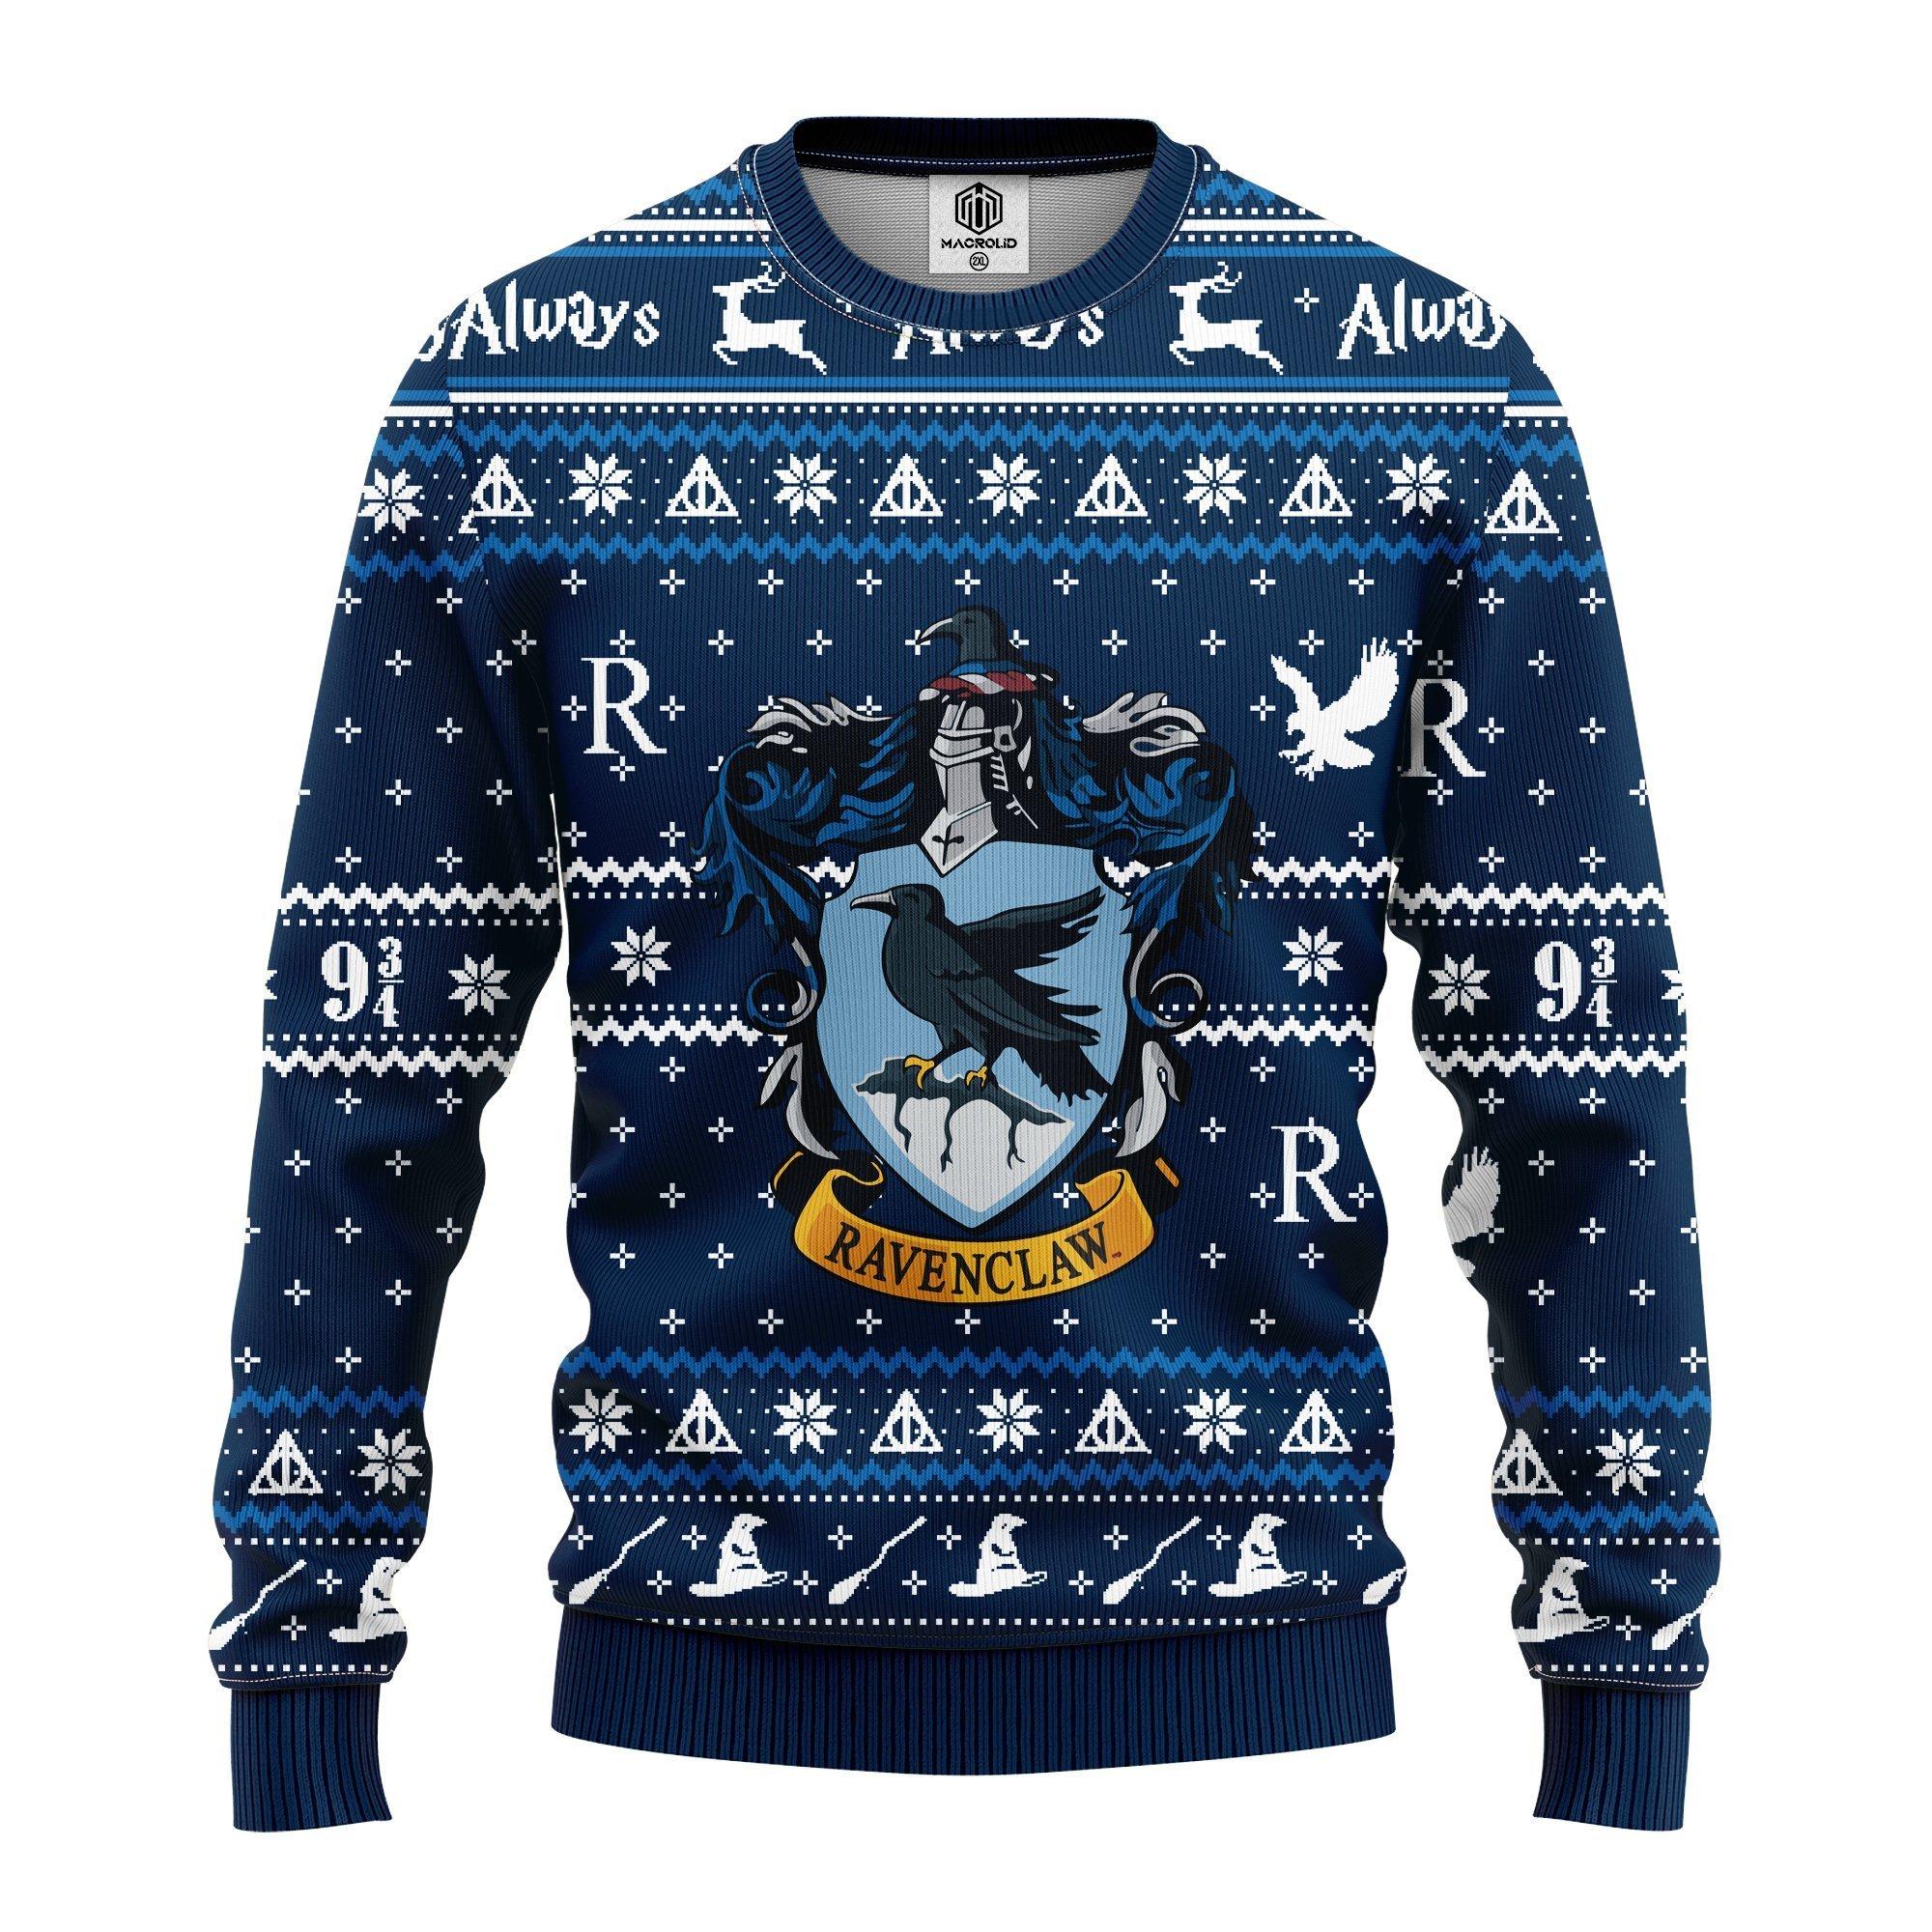 Buy Ravenclaw Harry Potter Team Ugly Christmas Sweater 64 - HomeFavo